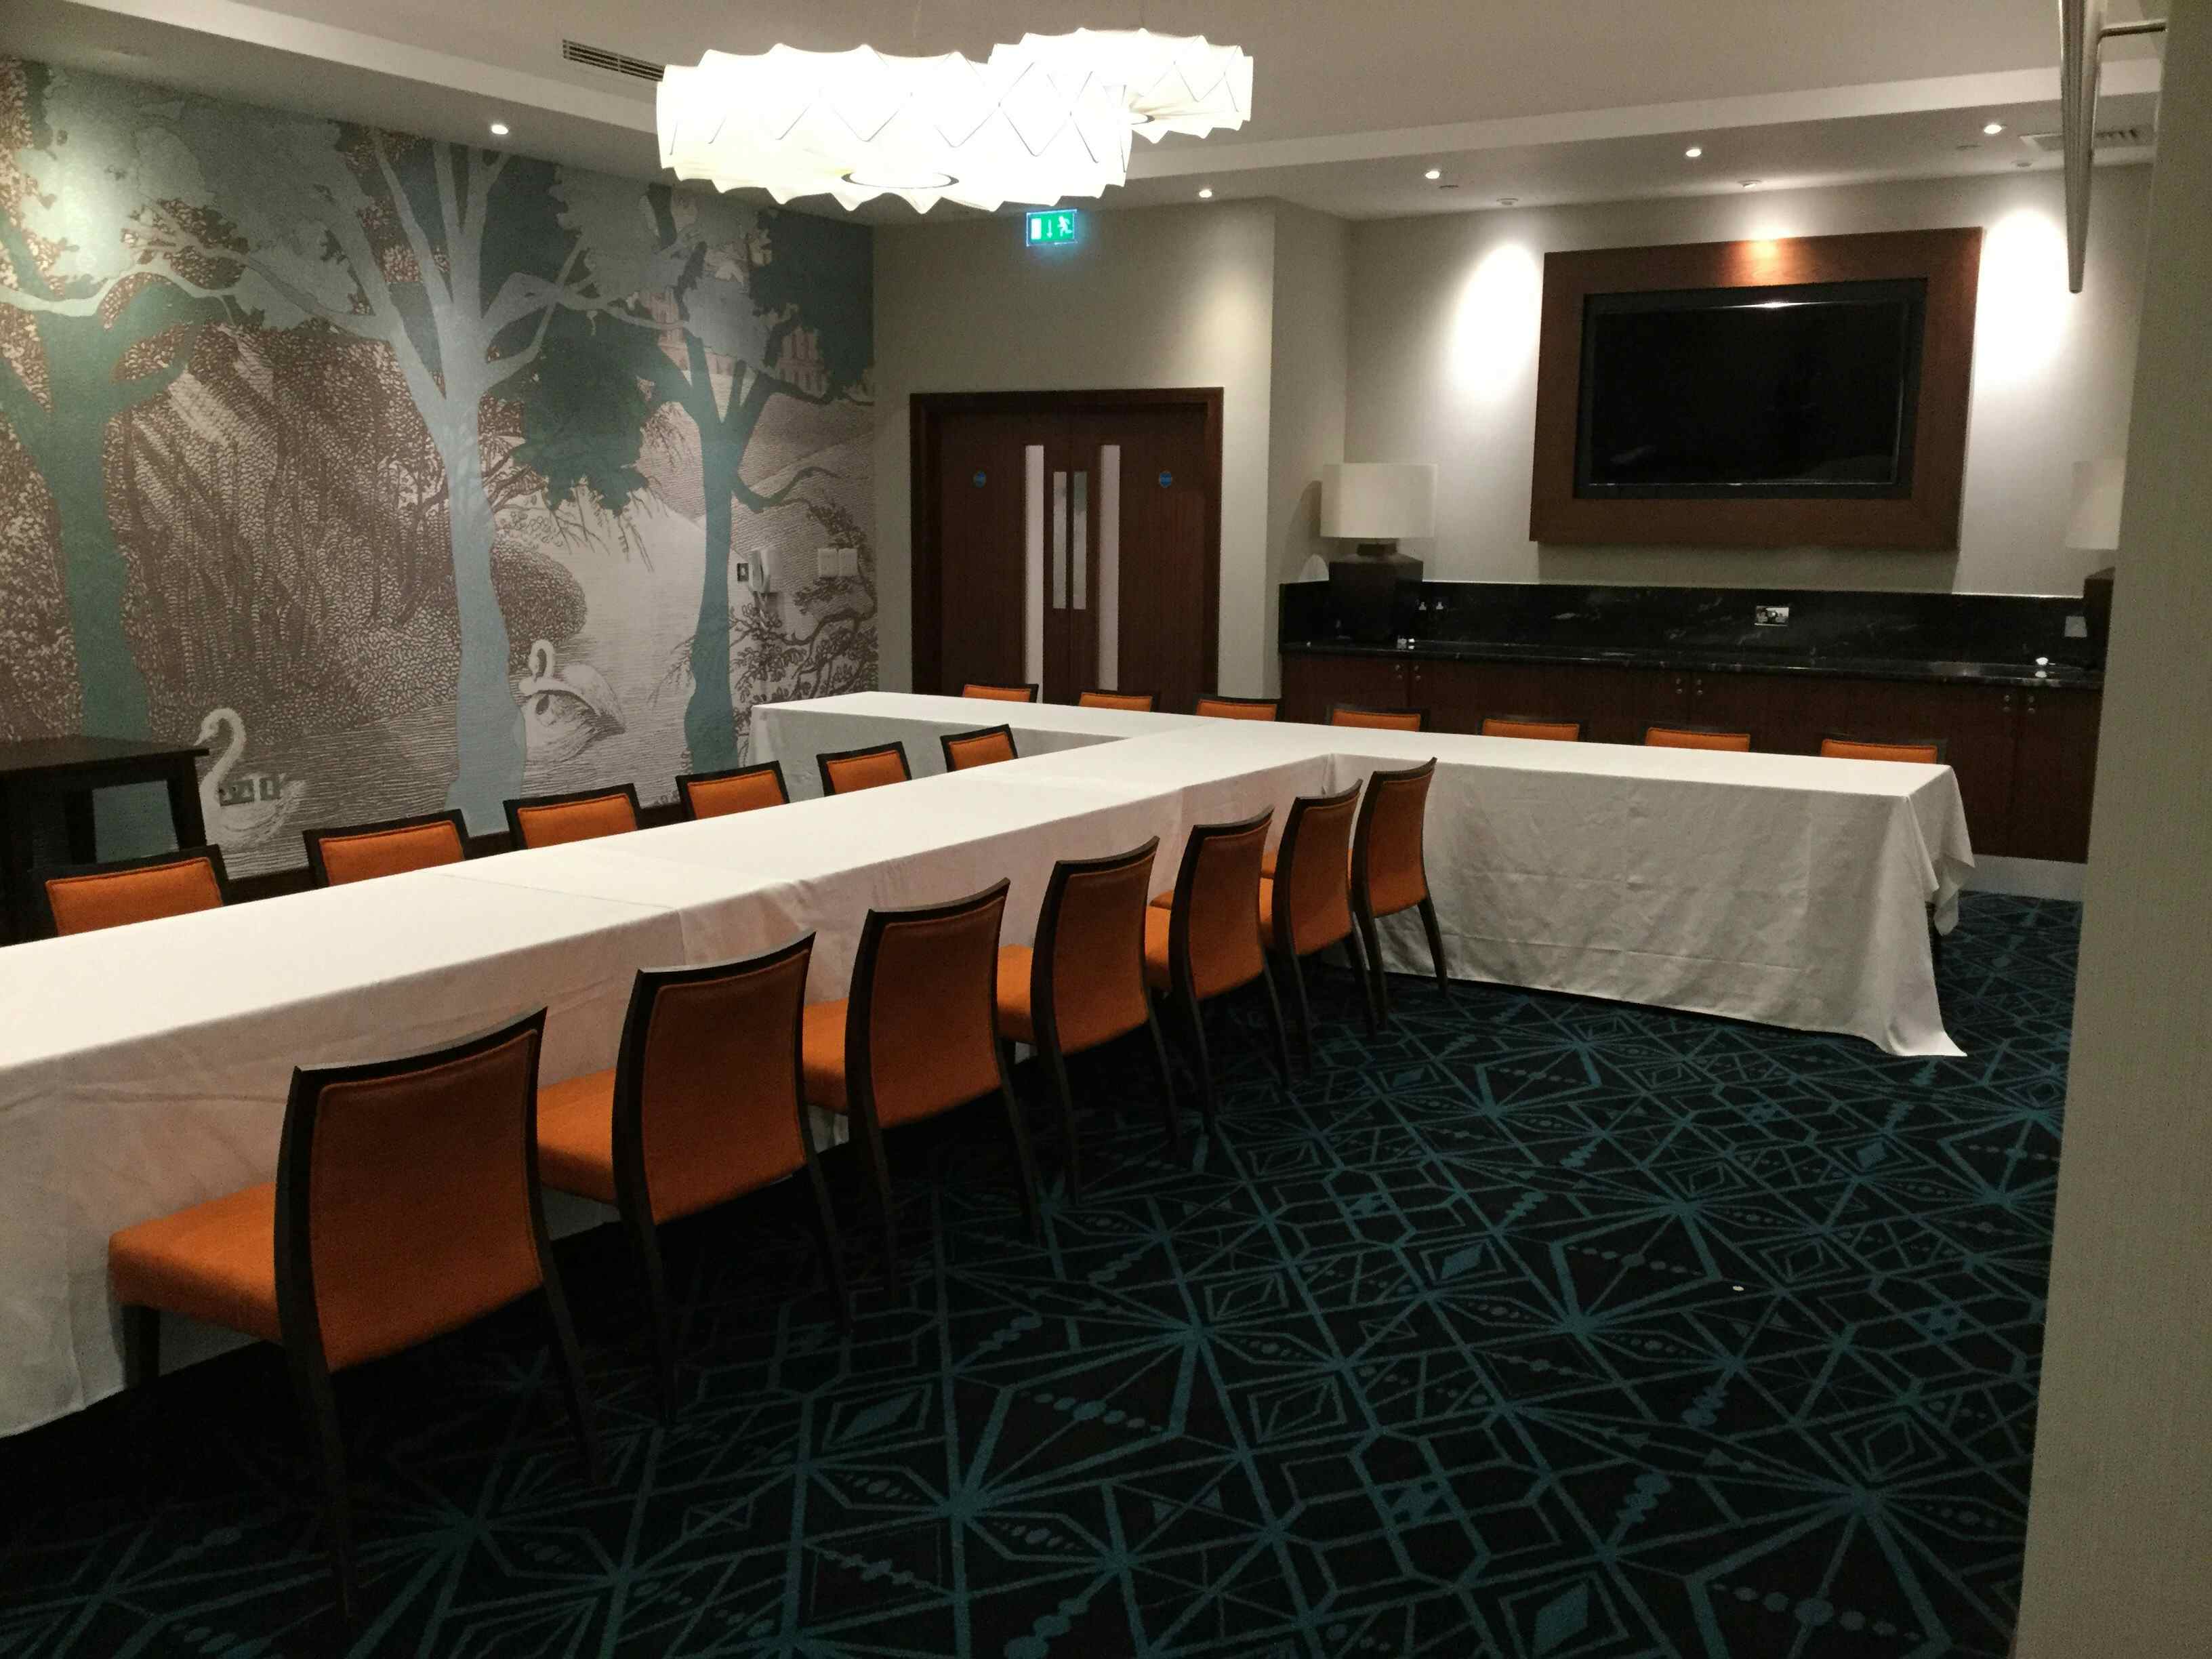 Meeting Room 1, The Royal National Hotel